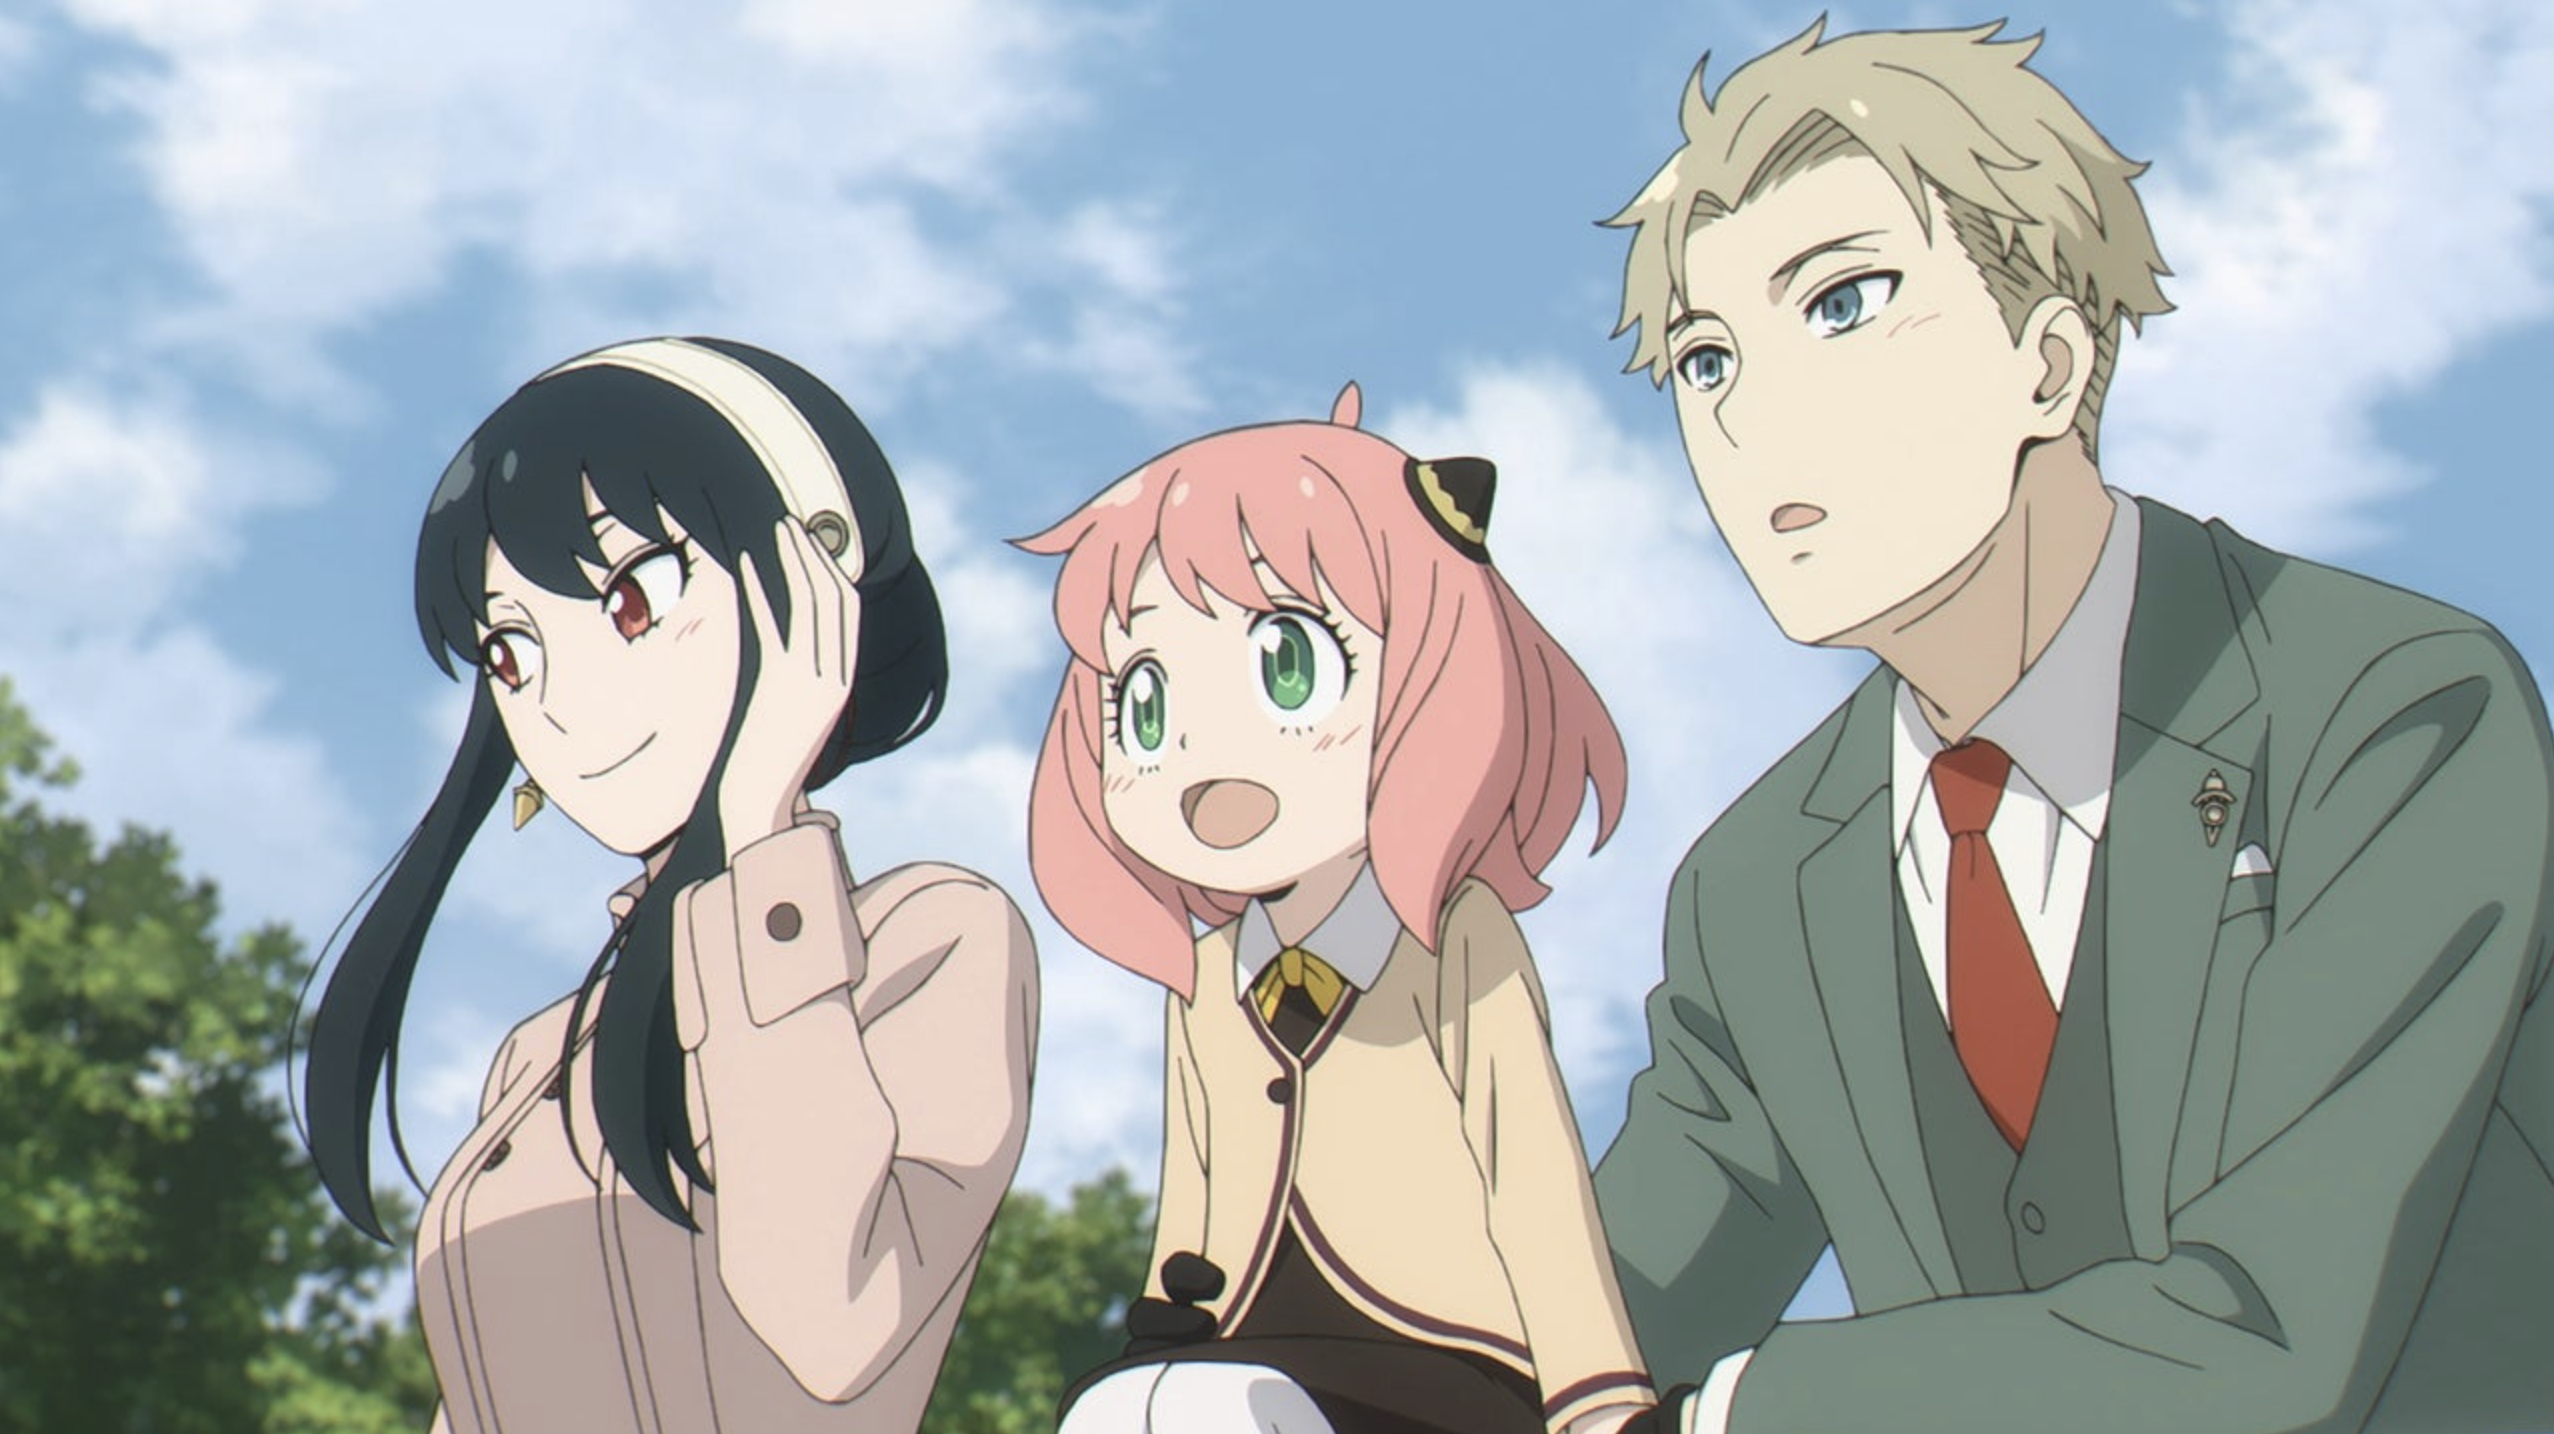 L-R: Yor, Anya and Loid from Spy x Family